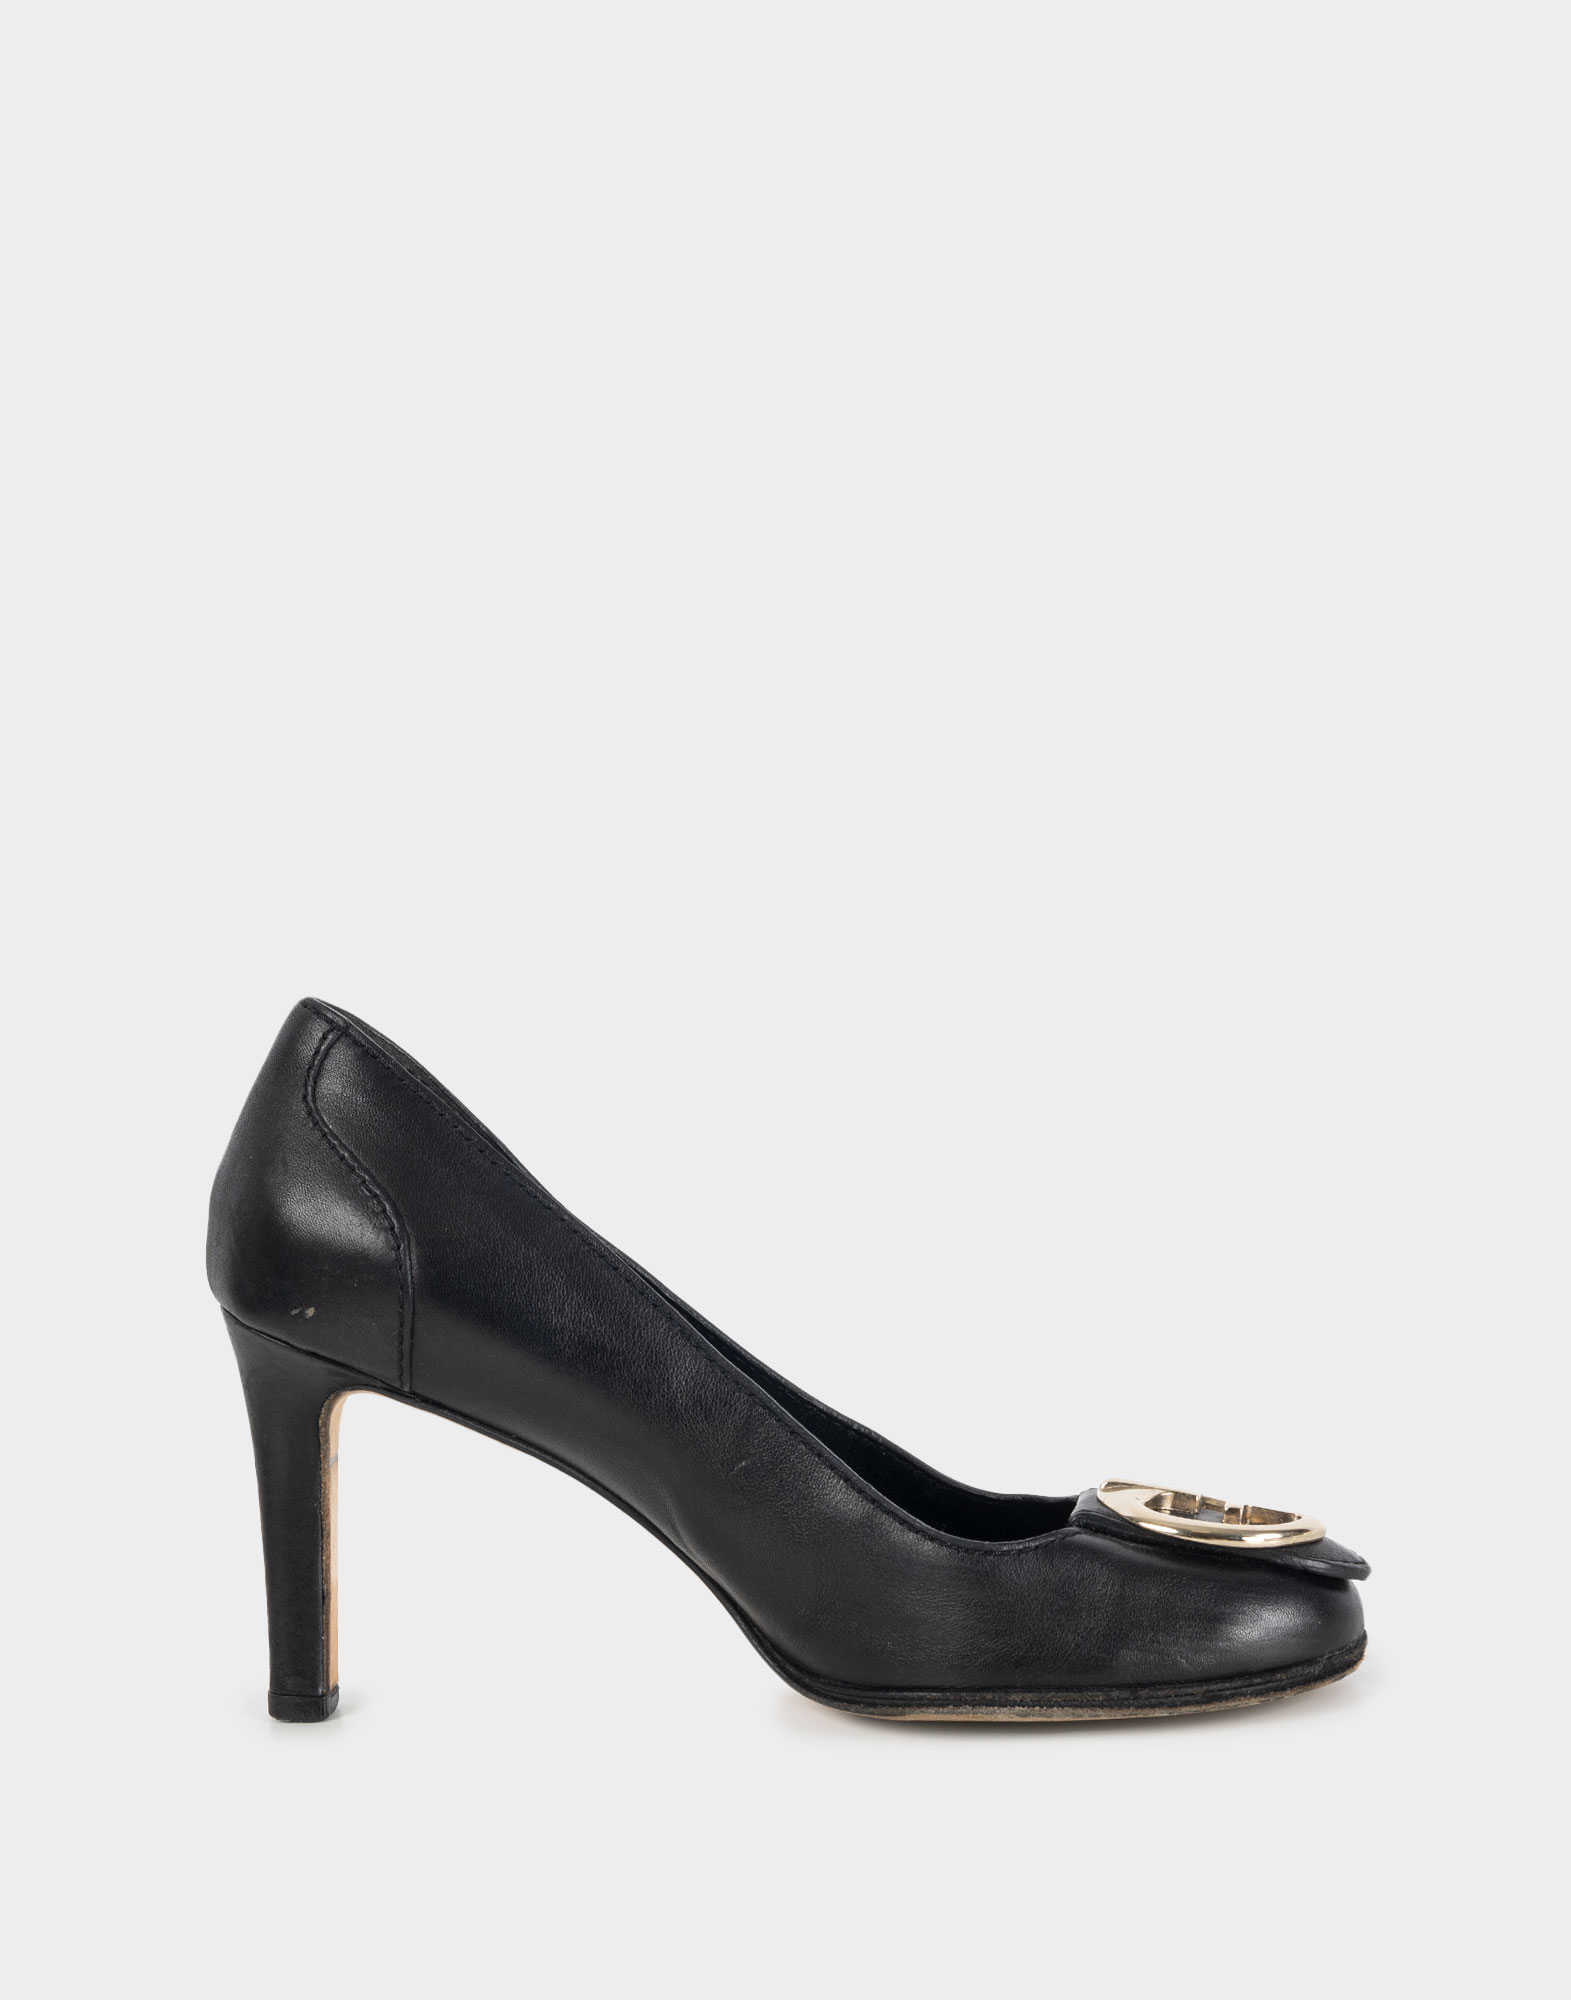 Gucci black leather pumps with gold GG plaque on the front and 8 cm high heel